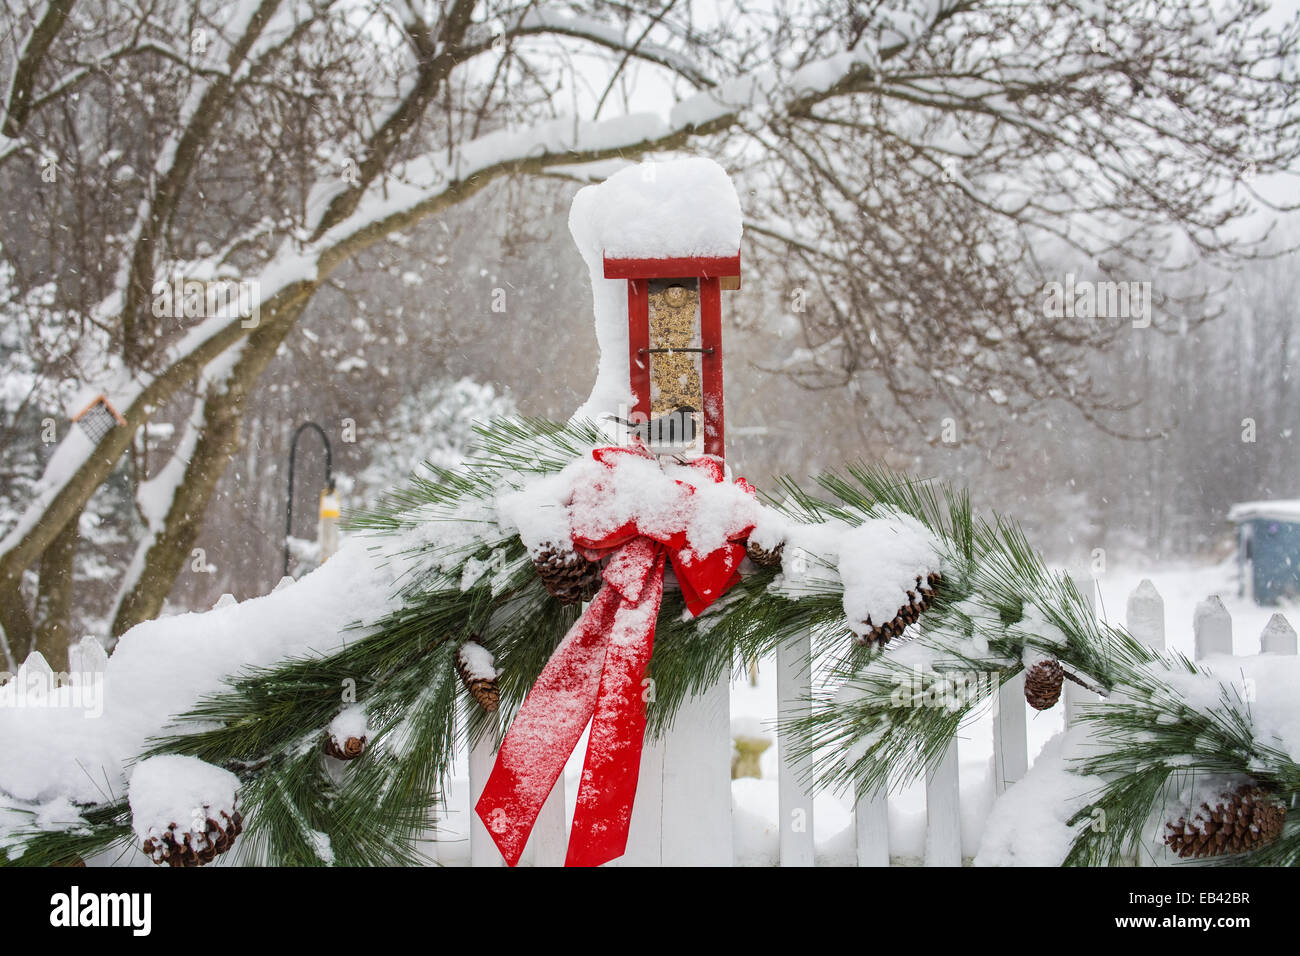 Winter garden bird feeder and red Christmas decorations garden bird feeder, white picket fence with garland and snow, Monroe Twp., New Jersey, USA US Stock Photo